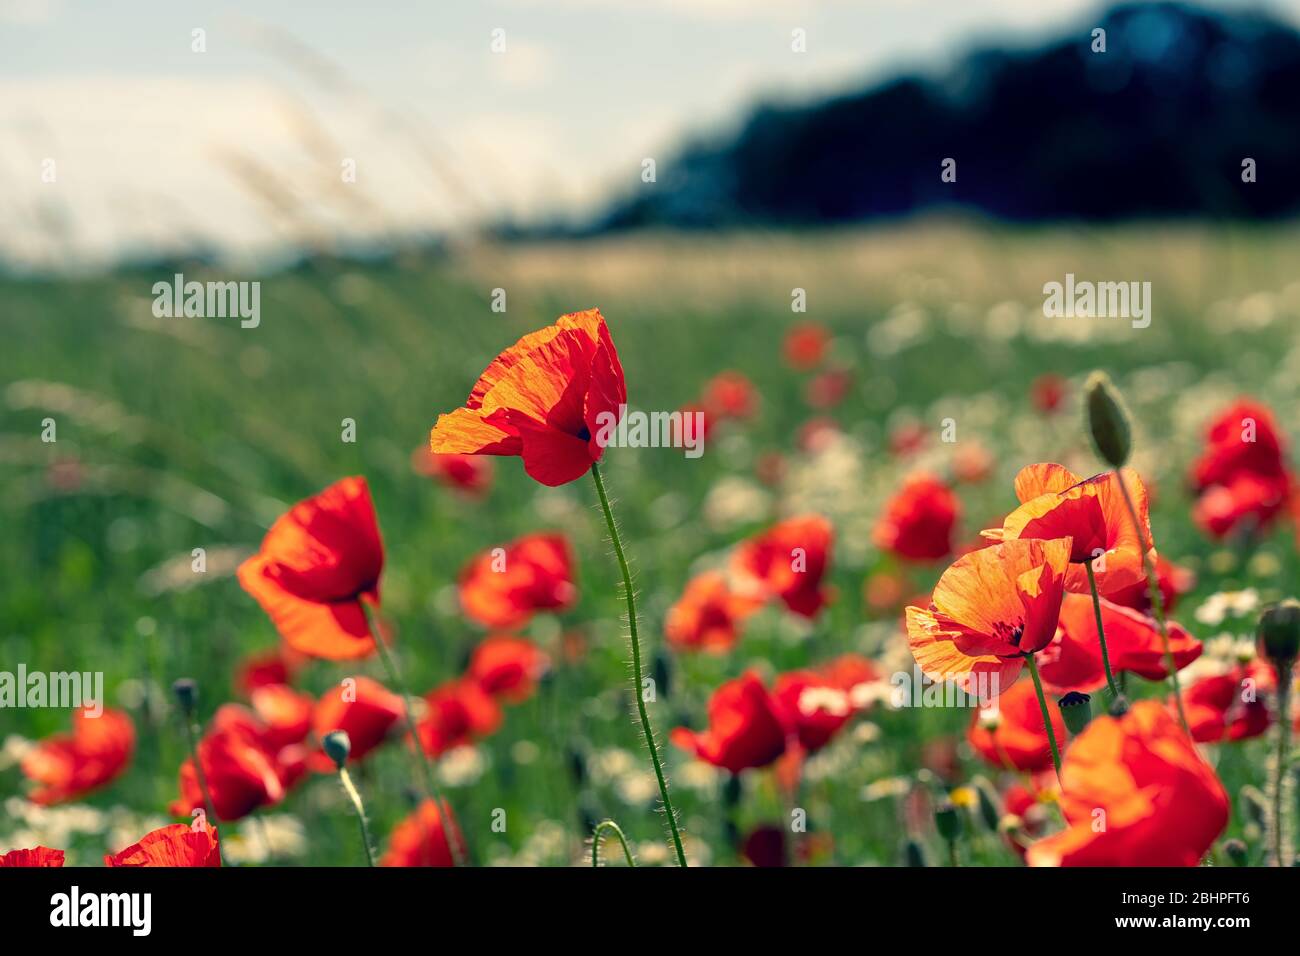 Daisies and poppies in the field Stock Photo